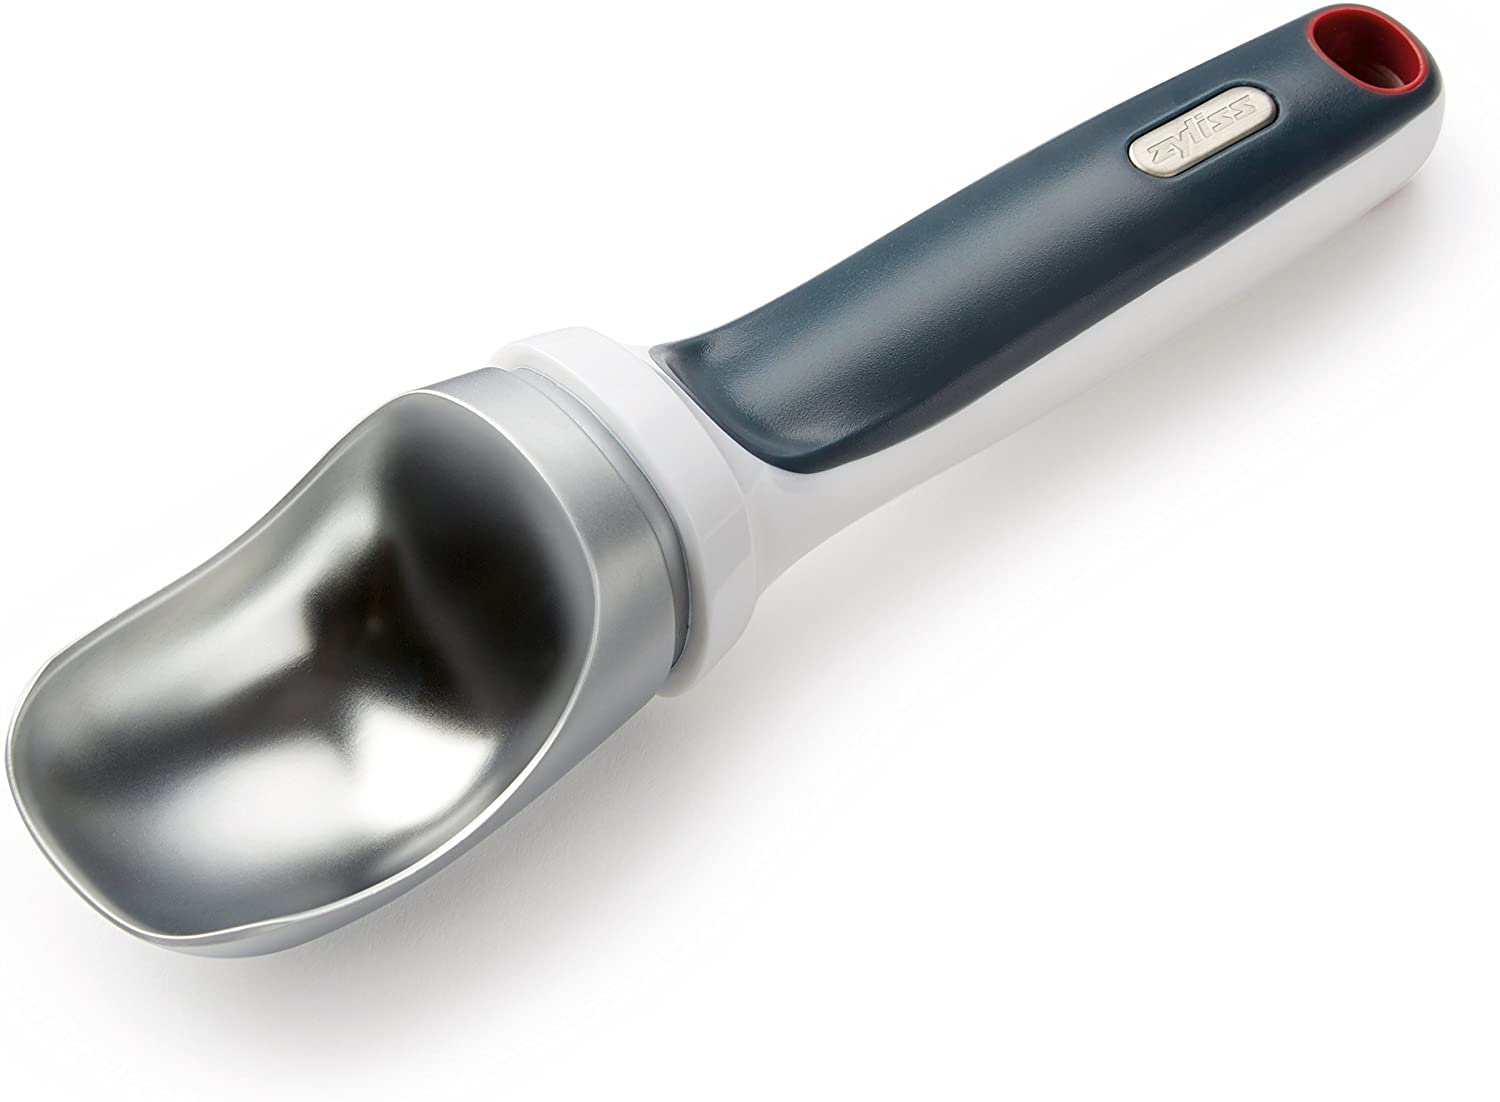 Zyliss Ice Cream Scoop - Ice Cream Spoon also glides through hard frozen ice, with zinc alloy and ergonomic handle design for effortless portioning